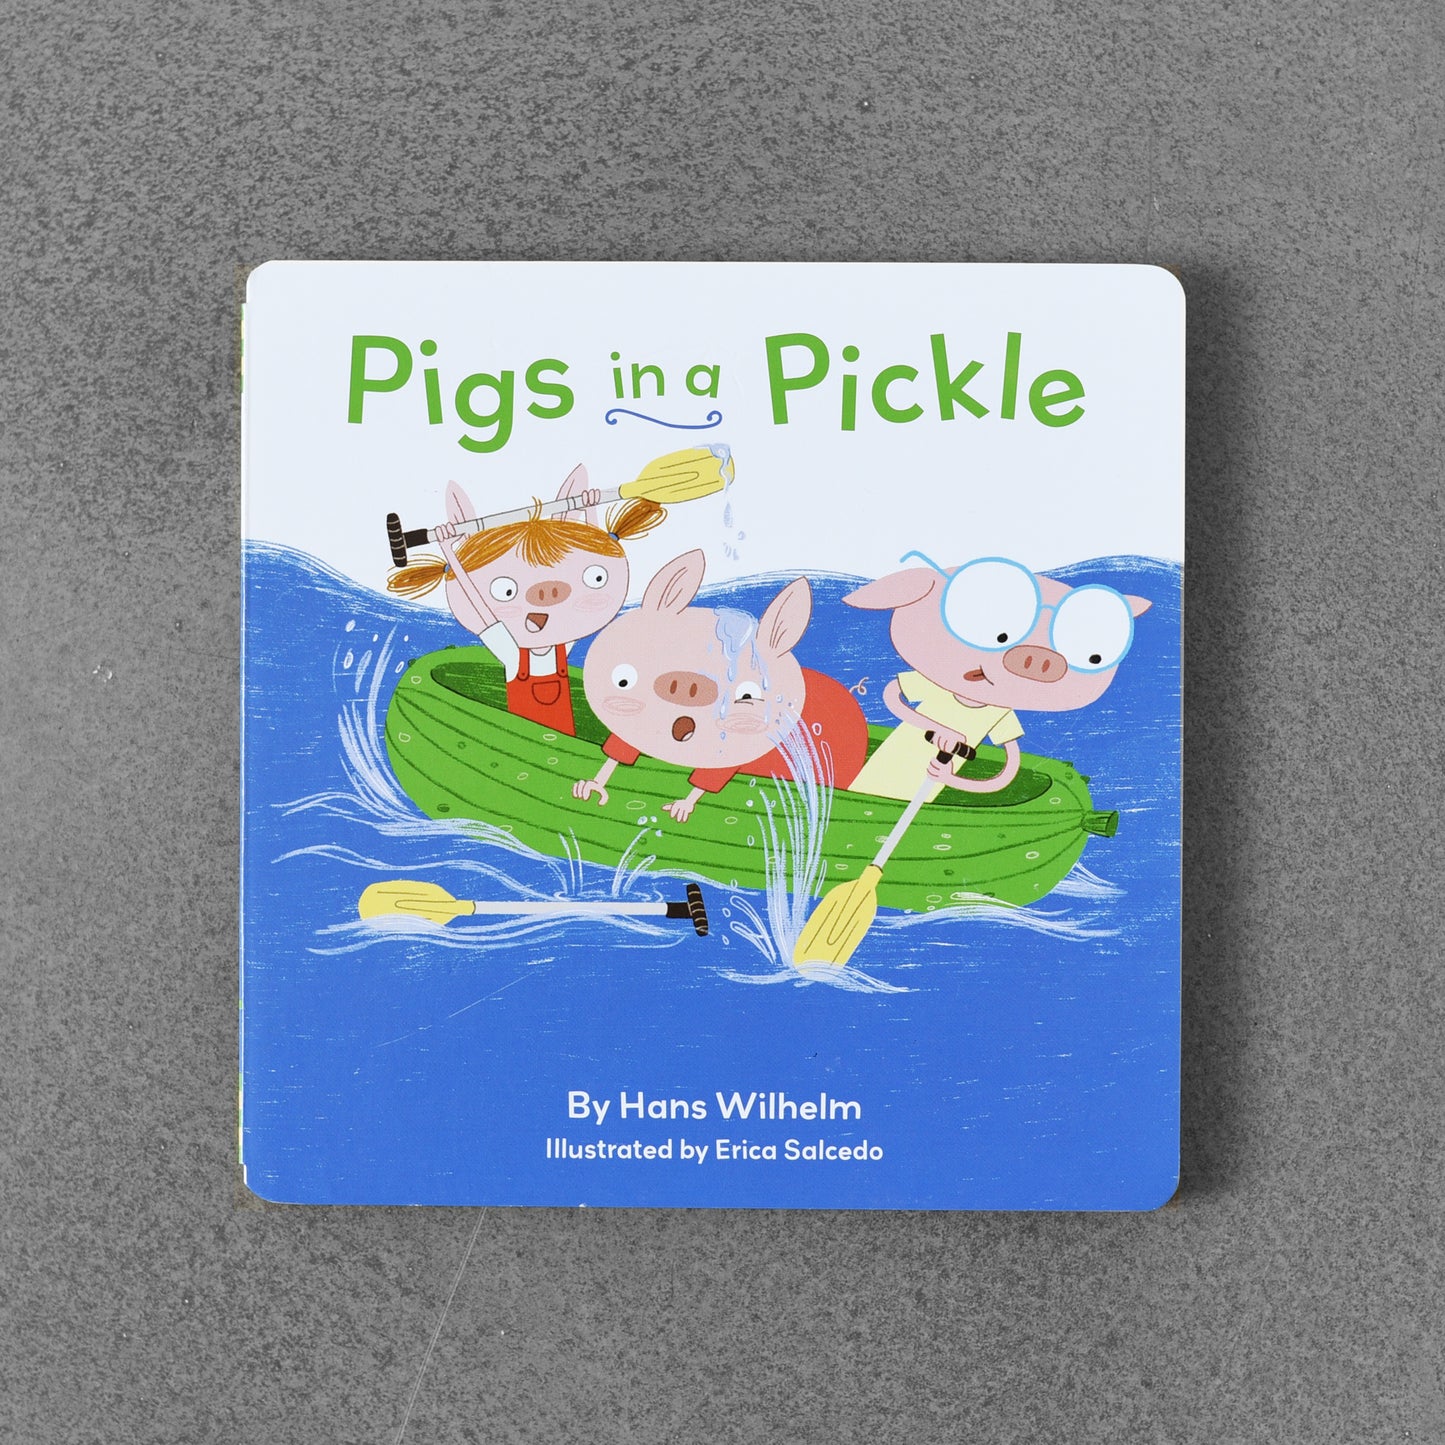 Pigs in a Pickle - Hans Wilhelm, illustrated by Erica Salcedo